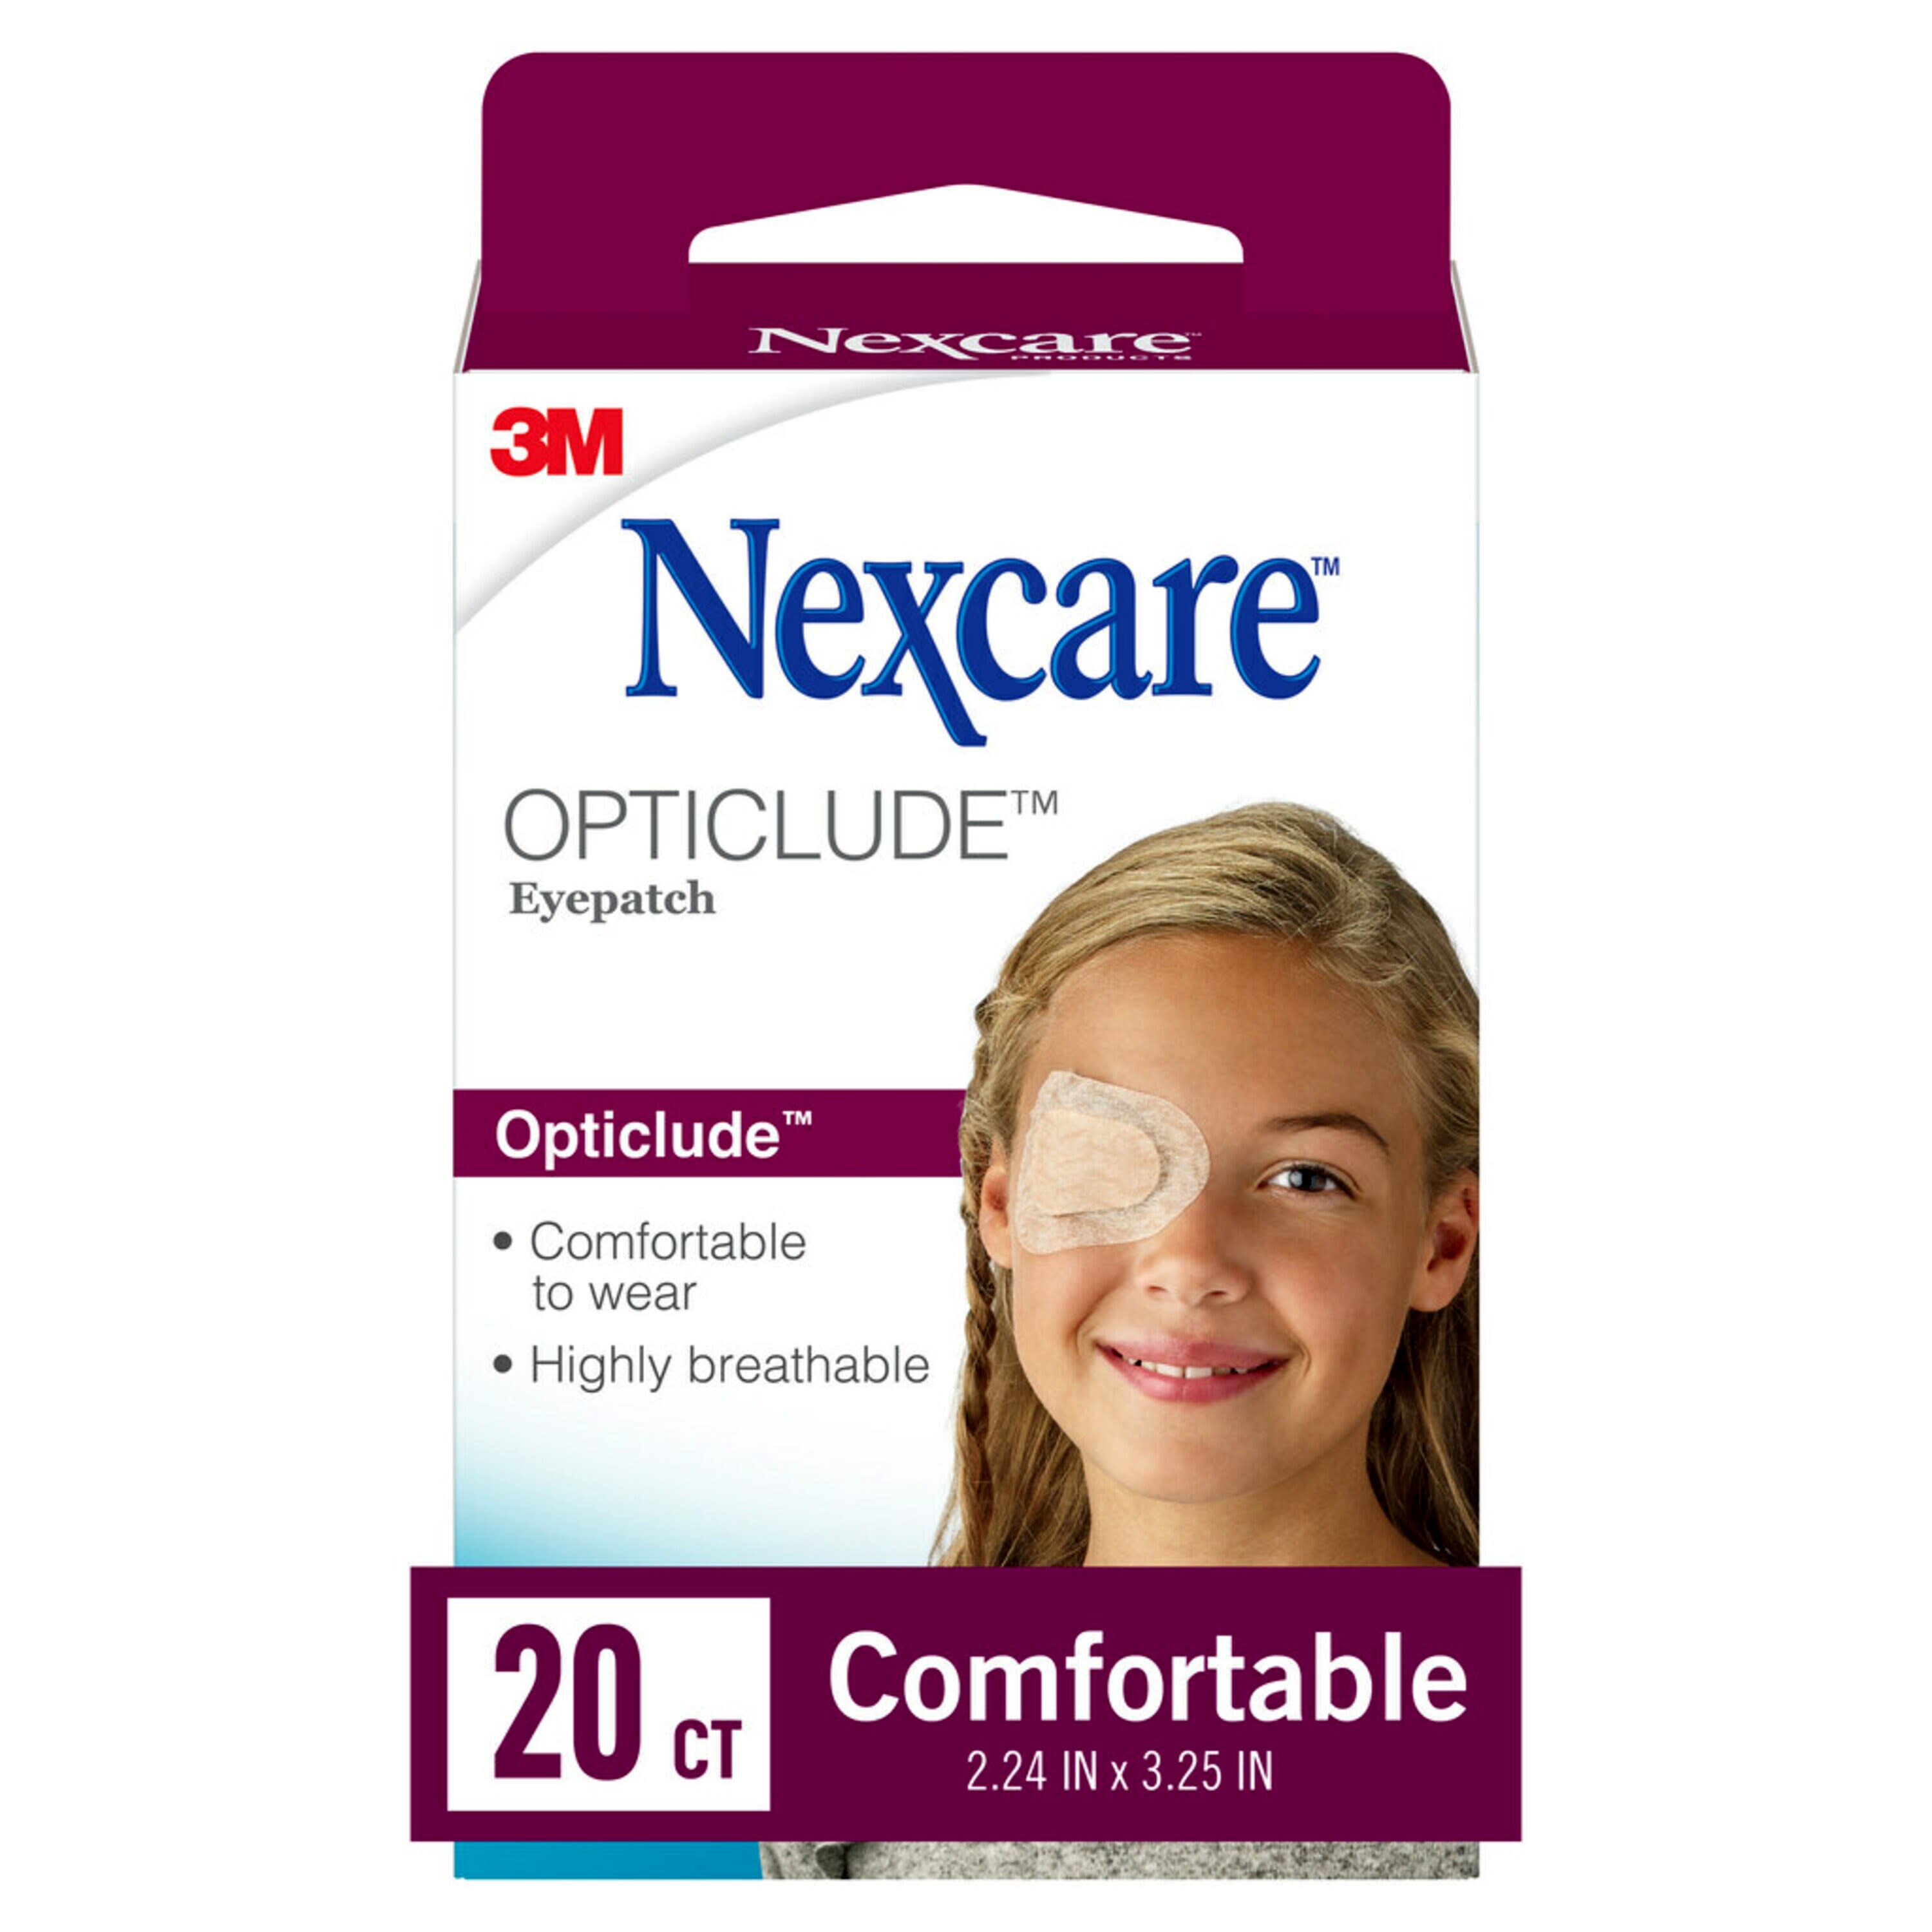 Nexcare Opticlude Comfort Eye Patch, Nude, Breathable, 20 Count - image 3 of 8